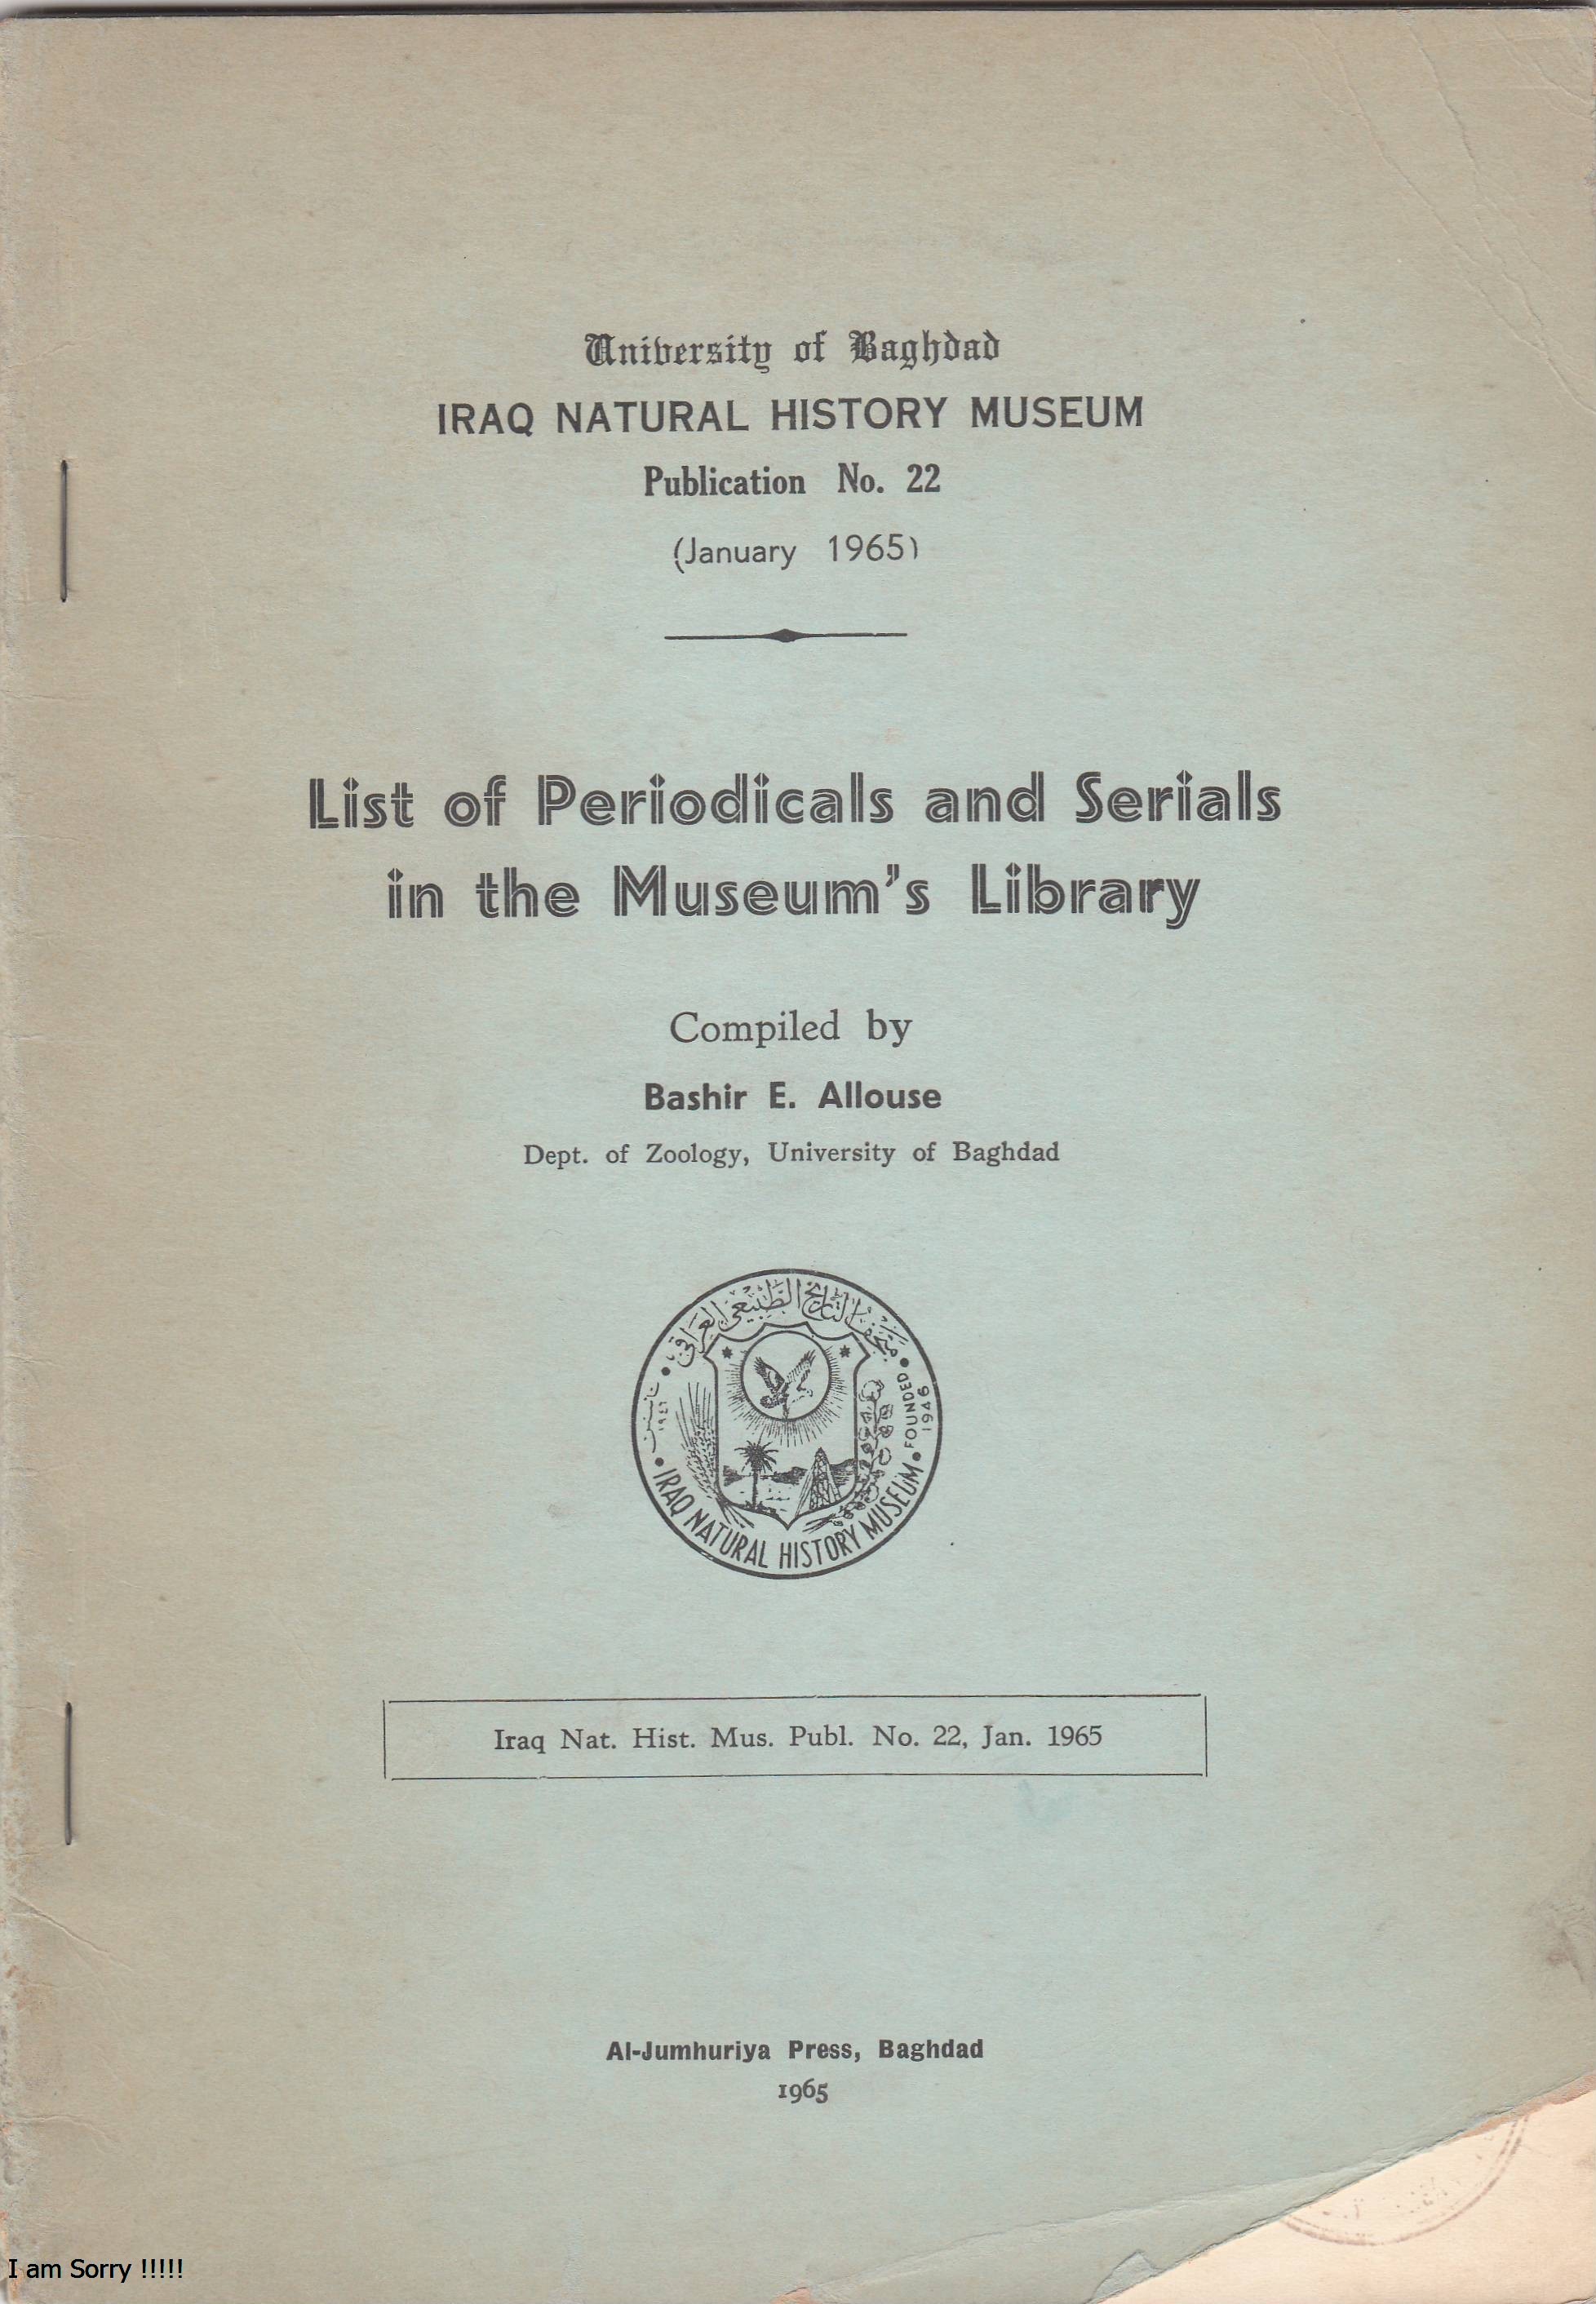 					View No. 22 (1965): List of Periodicals and Serials in the Museum's Library Compiled by Bashir E. Allouse Dept. of Zoology, University of Baghdad Iraq Nat.Hist. Mus, Baghdad, Iraq
				